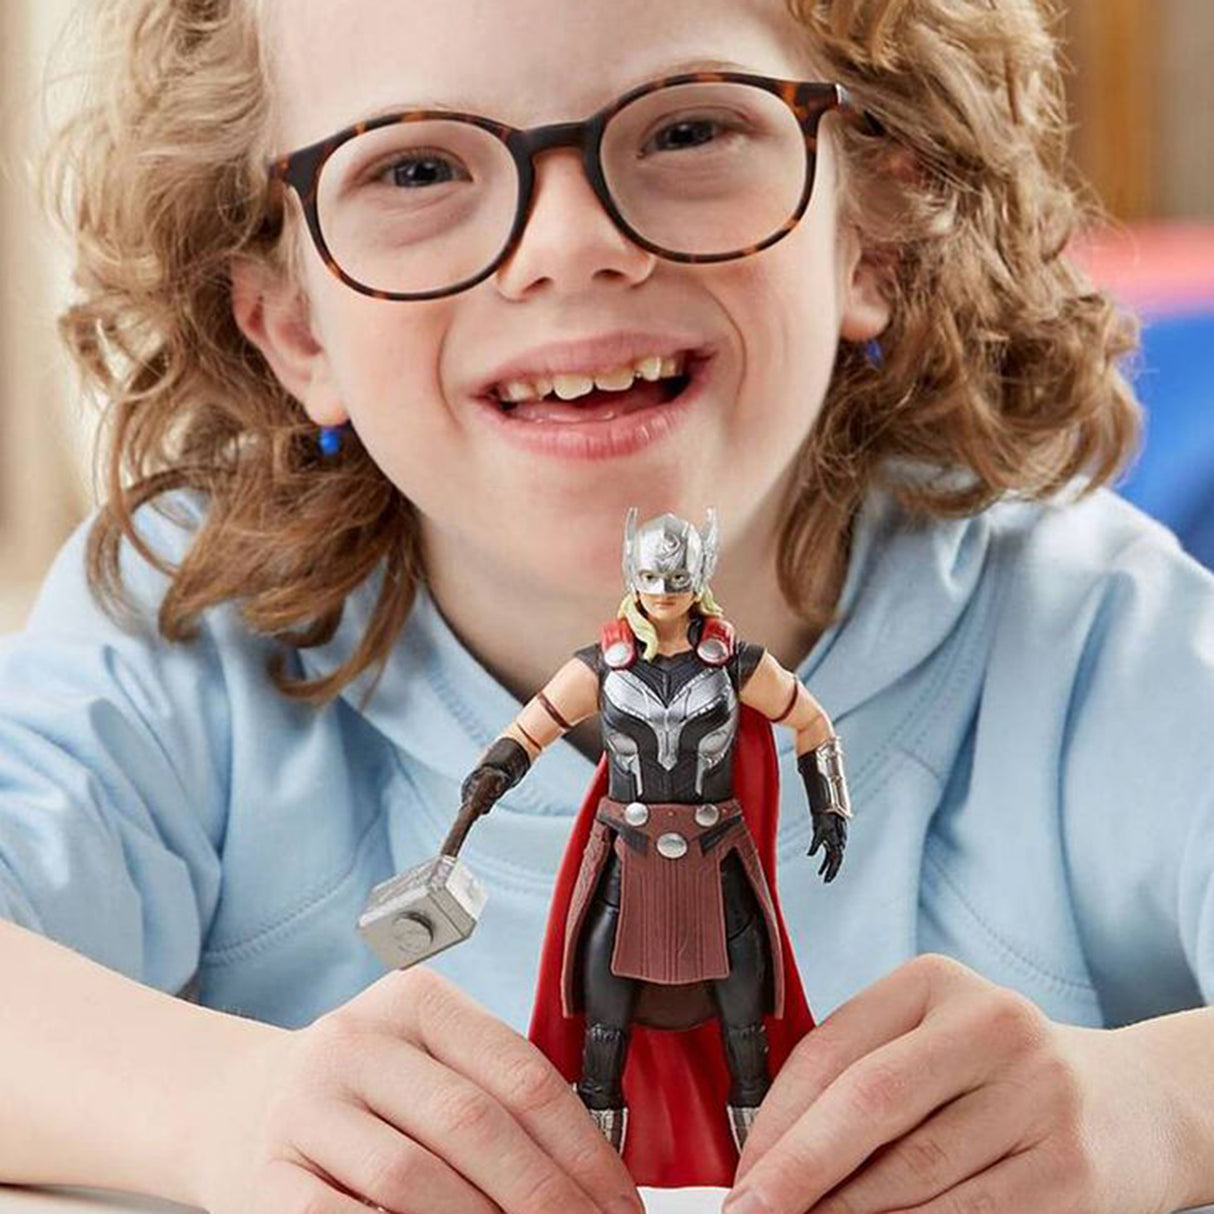 Marvel Studios' Thor: Love and Thunder Mighty Thor Deluxe Action Figure